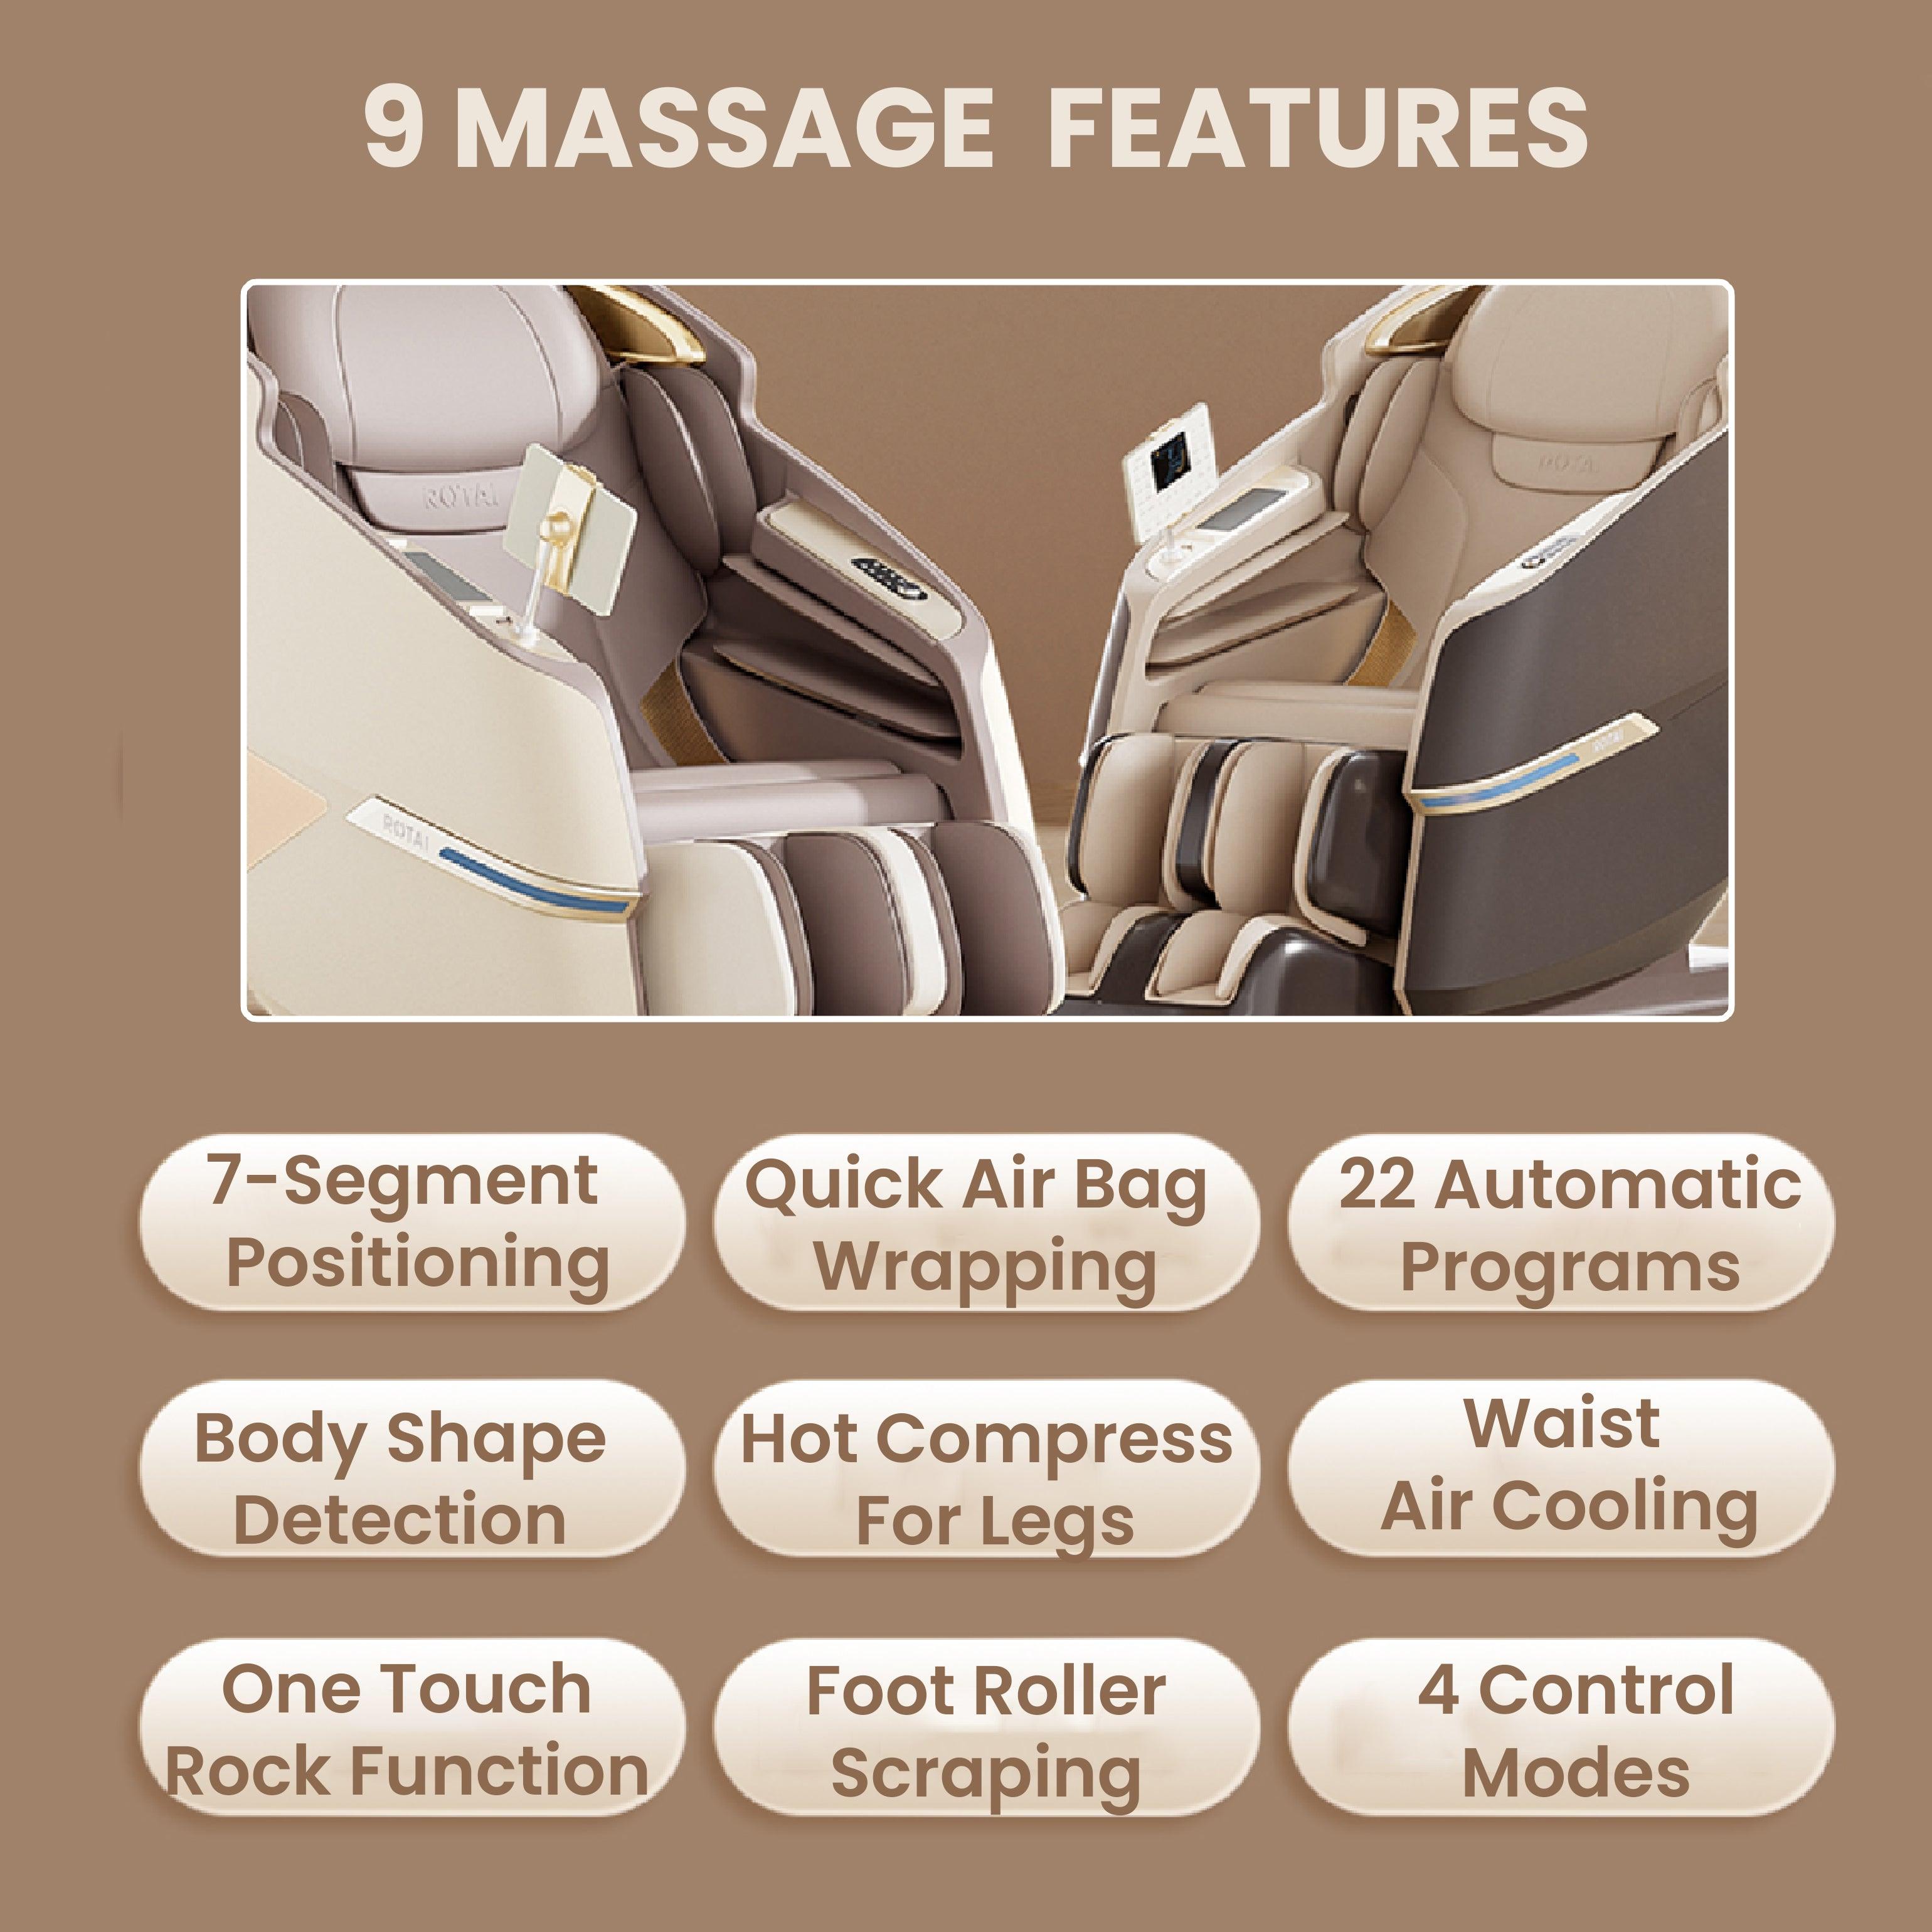 9 massage features of Royal Magestic Pro Massage Chair including 7-segment positioning, quick air bag wrapping, hot compress for legs, and more